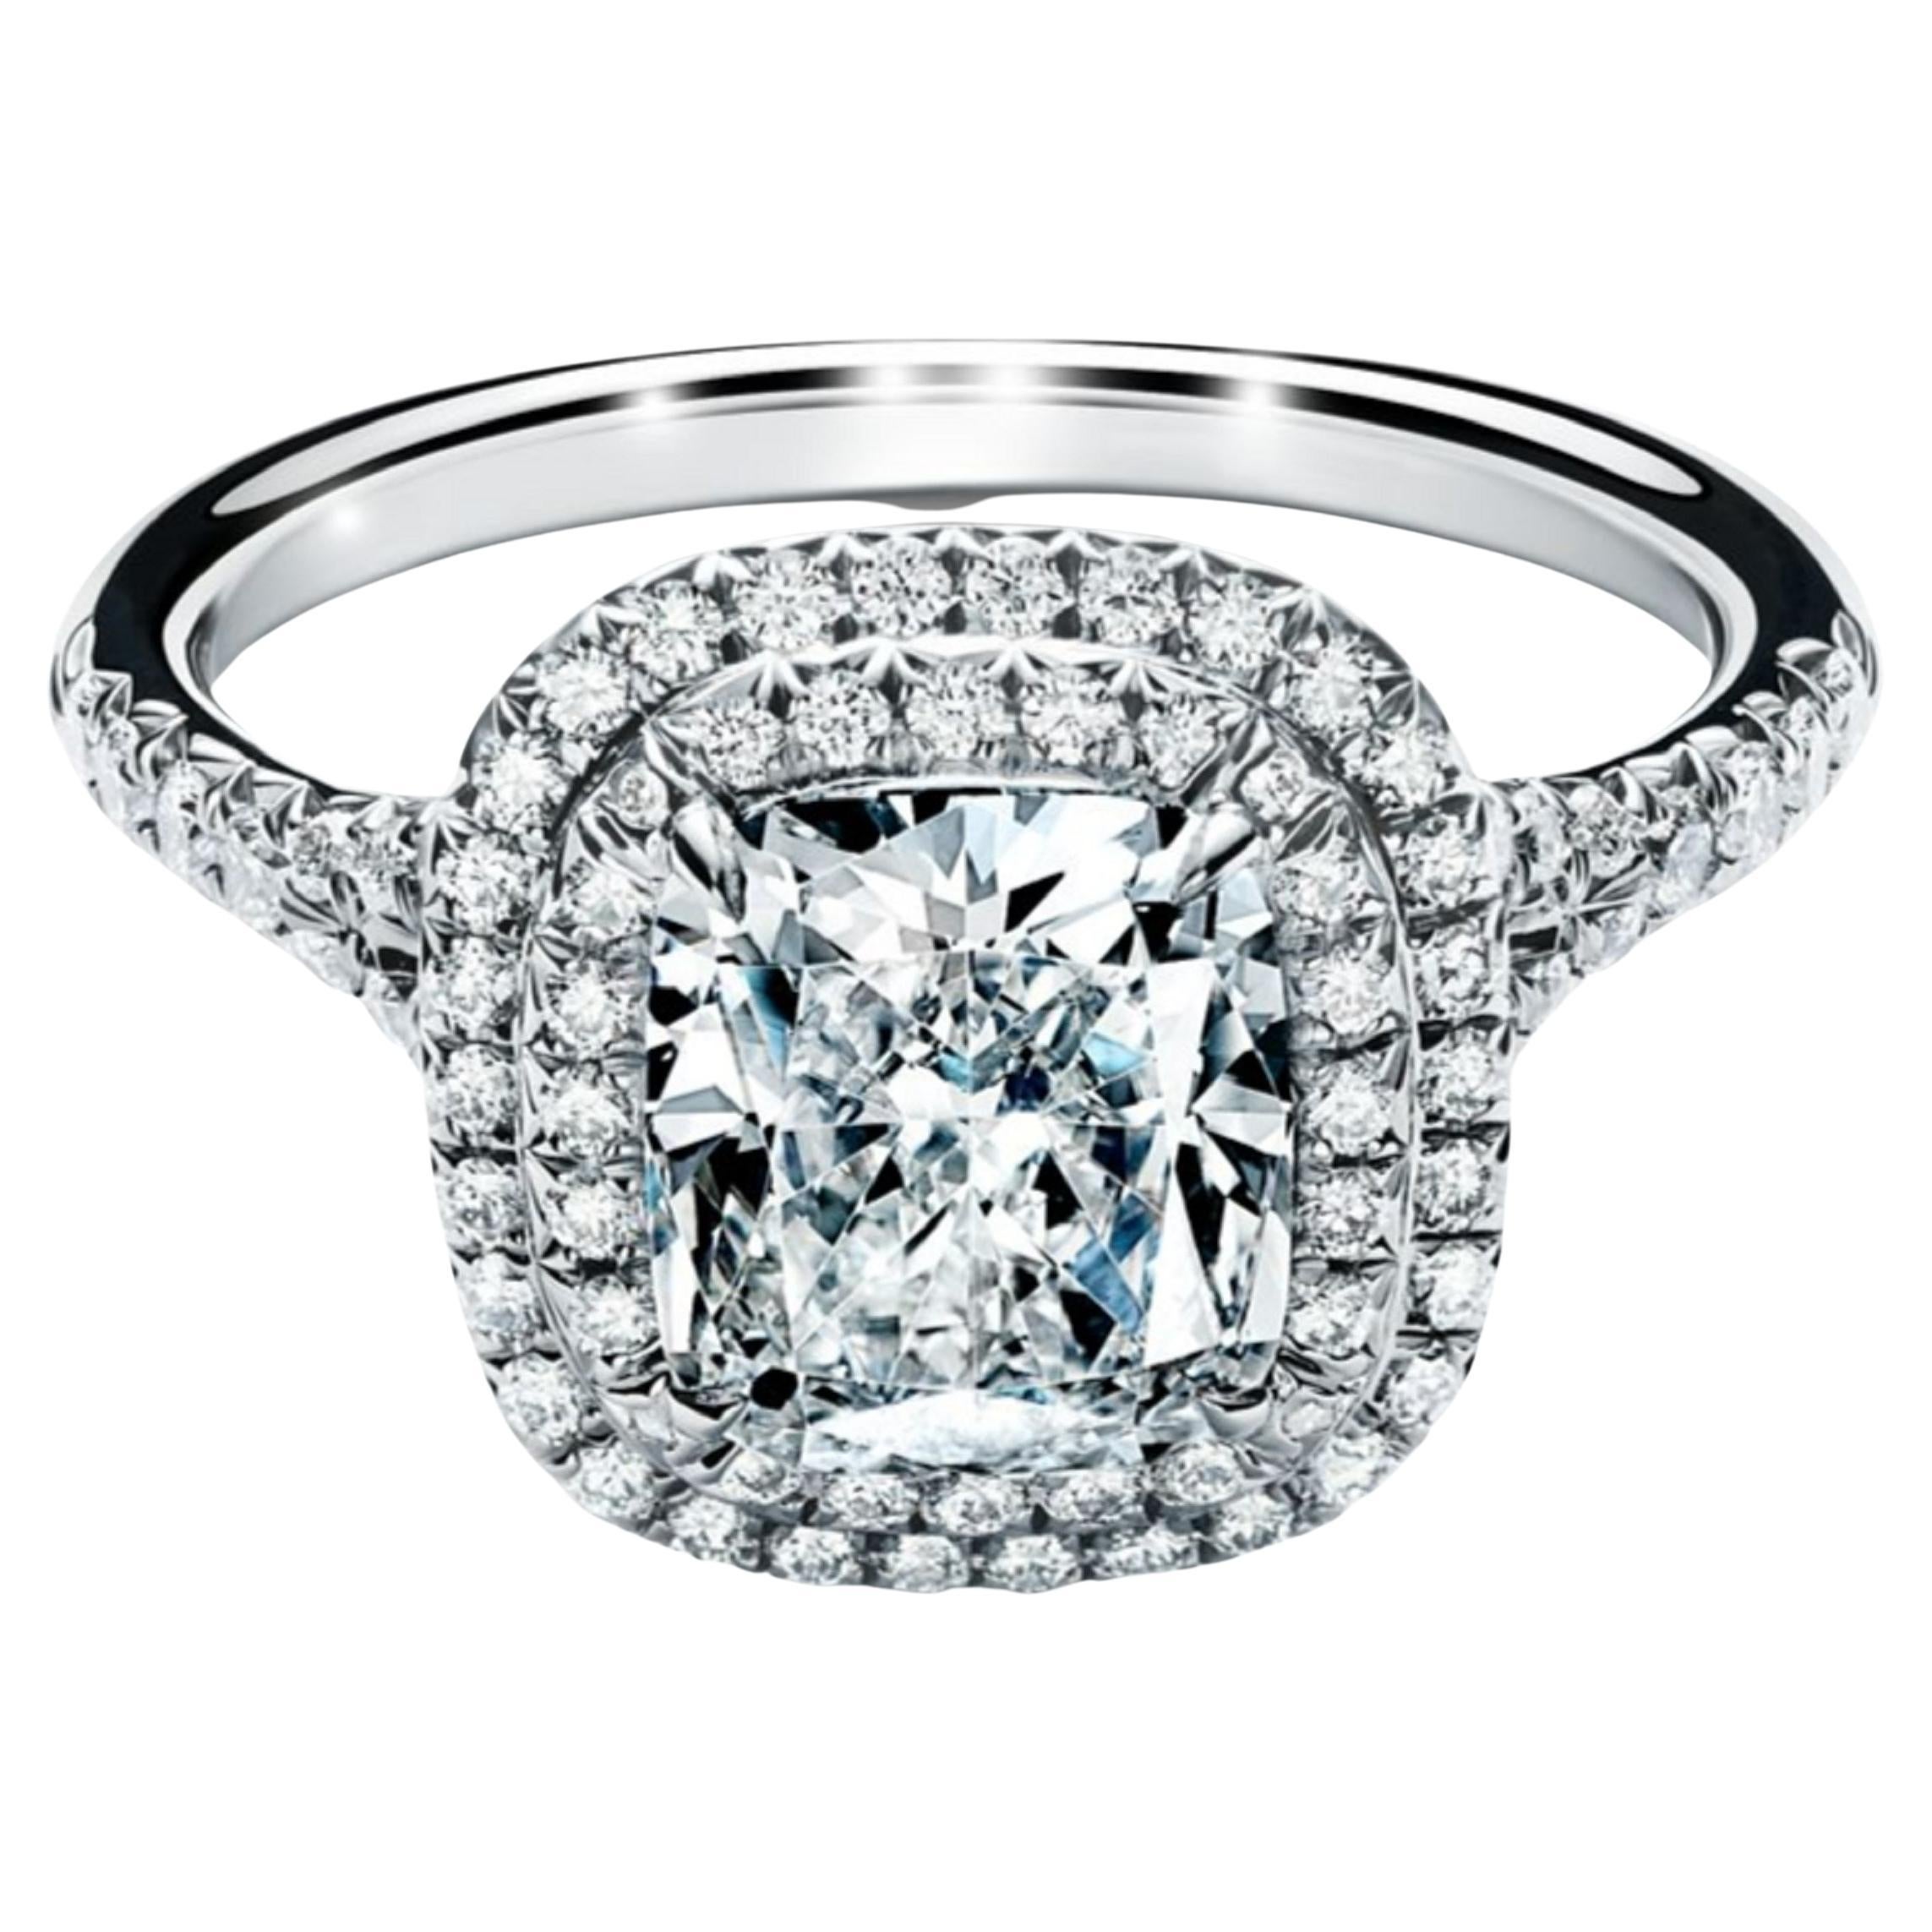 Tiffany & Co. Soleste Fancy Internally Flawless Halo Diamond Engagement Ring For Sale